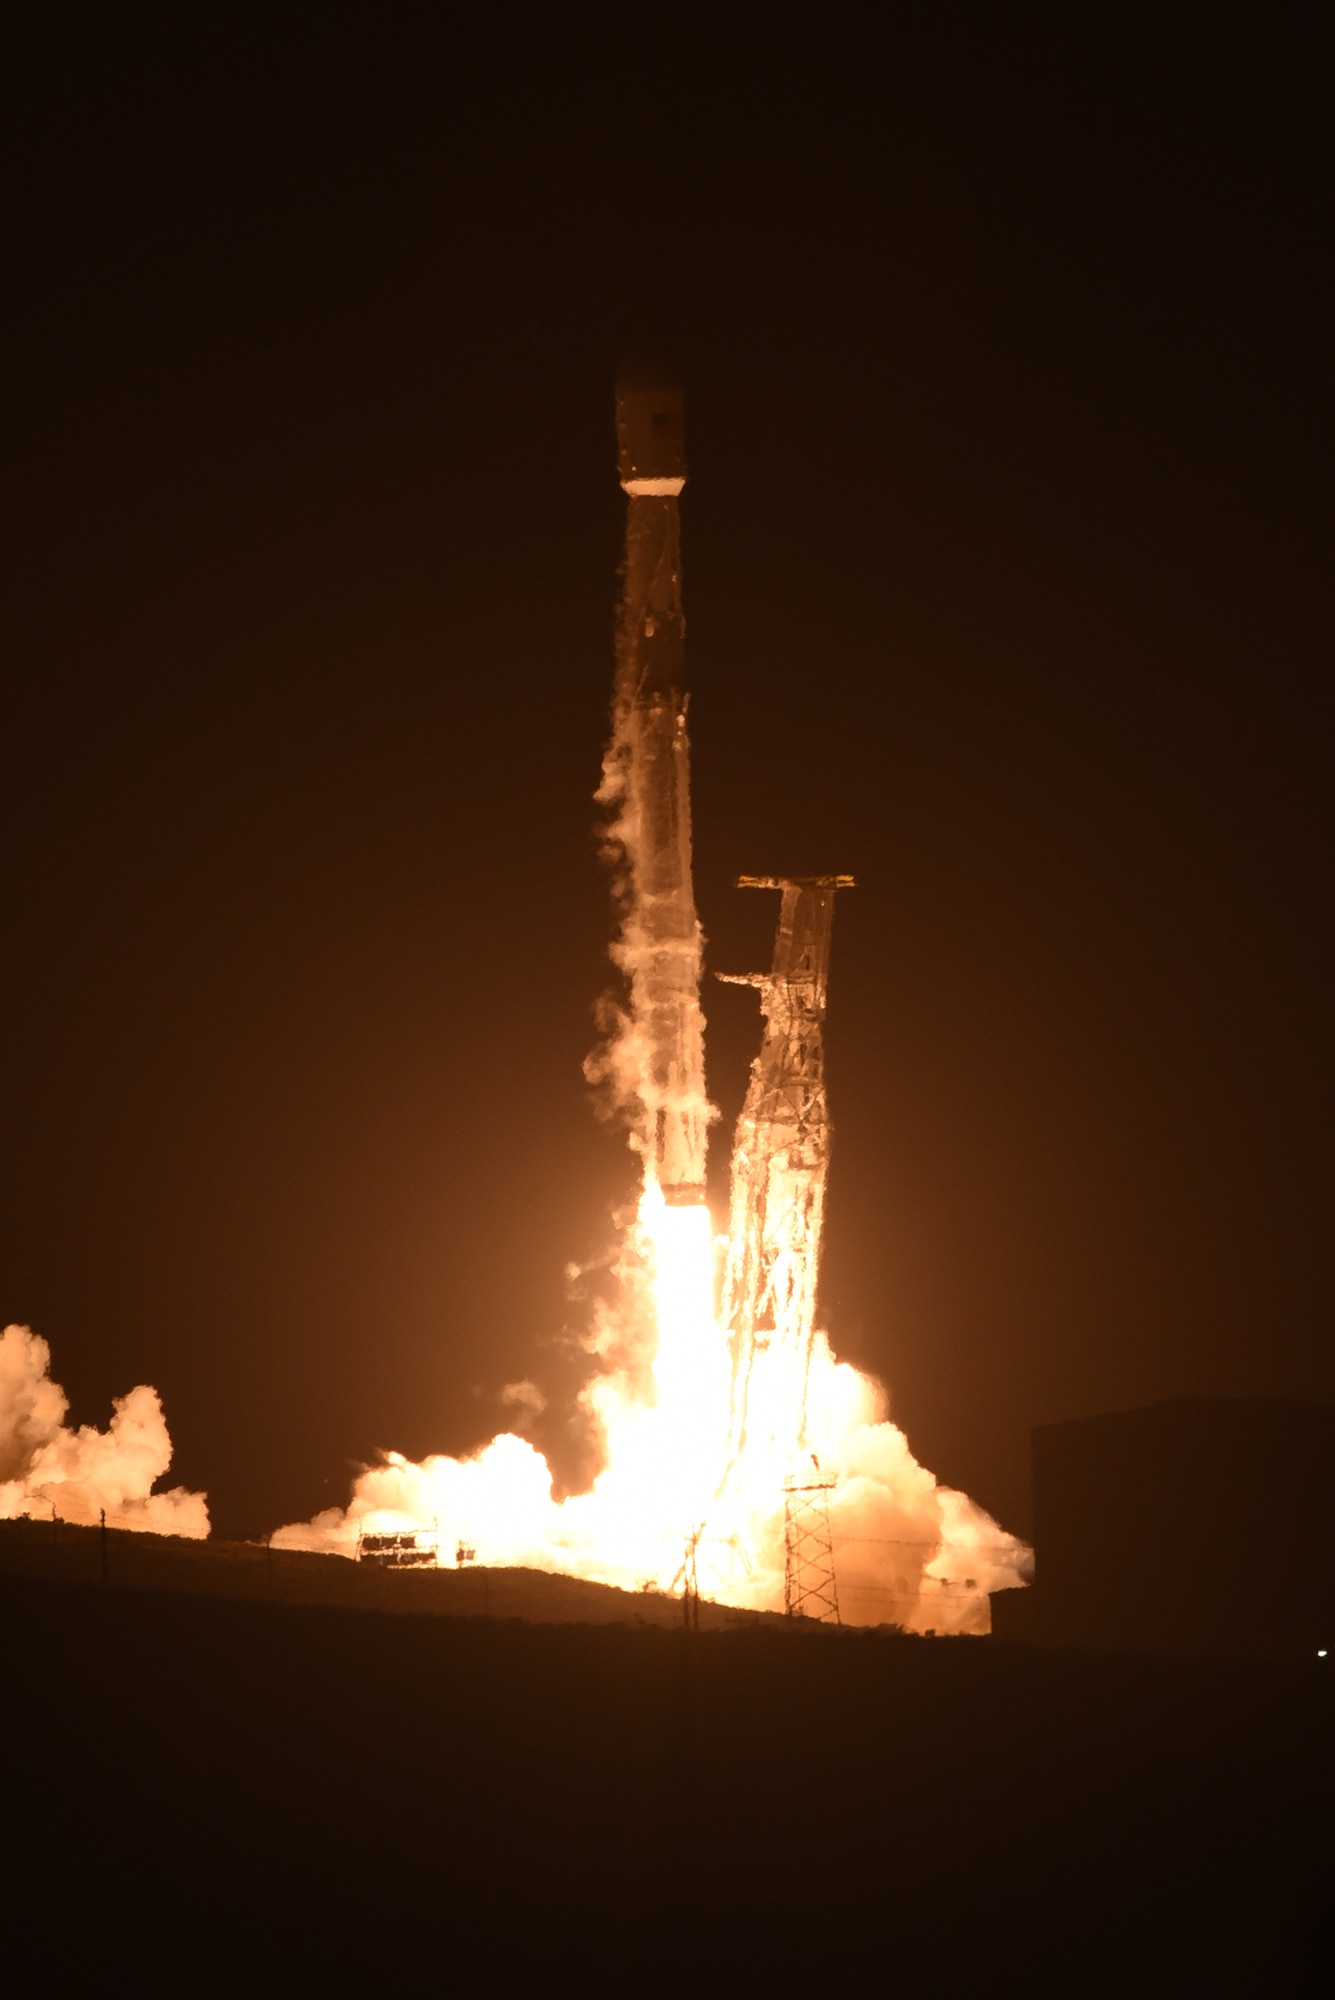 Team Vandenberg successfully launched a Falcon 9 rocket carrying a PAZ payload from Space Launch Complex-4 here, Thursday, Feb. 22, at 6:17 a.m. PST. (U.S. Air Force photo by Tech. Sgt. Jim Araos/Released)